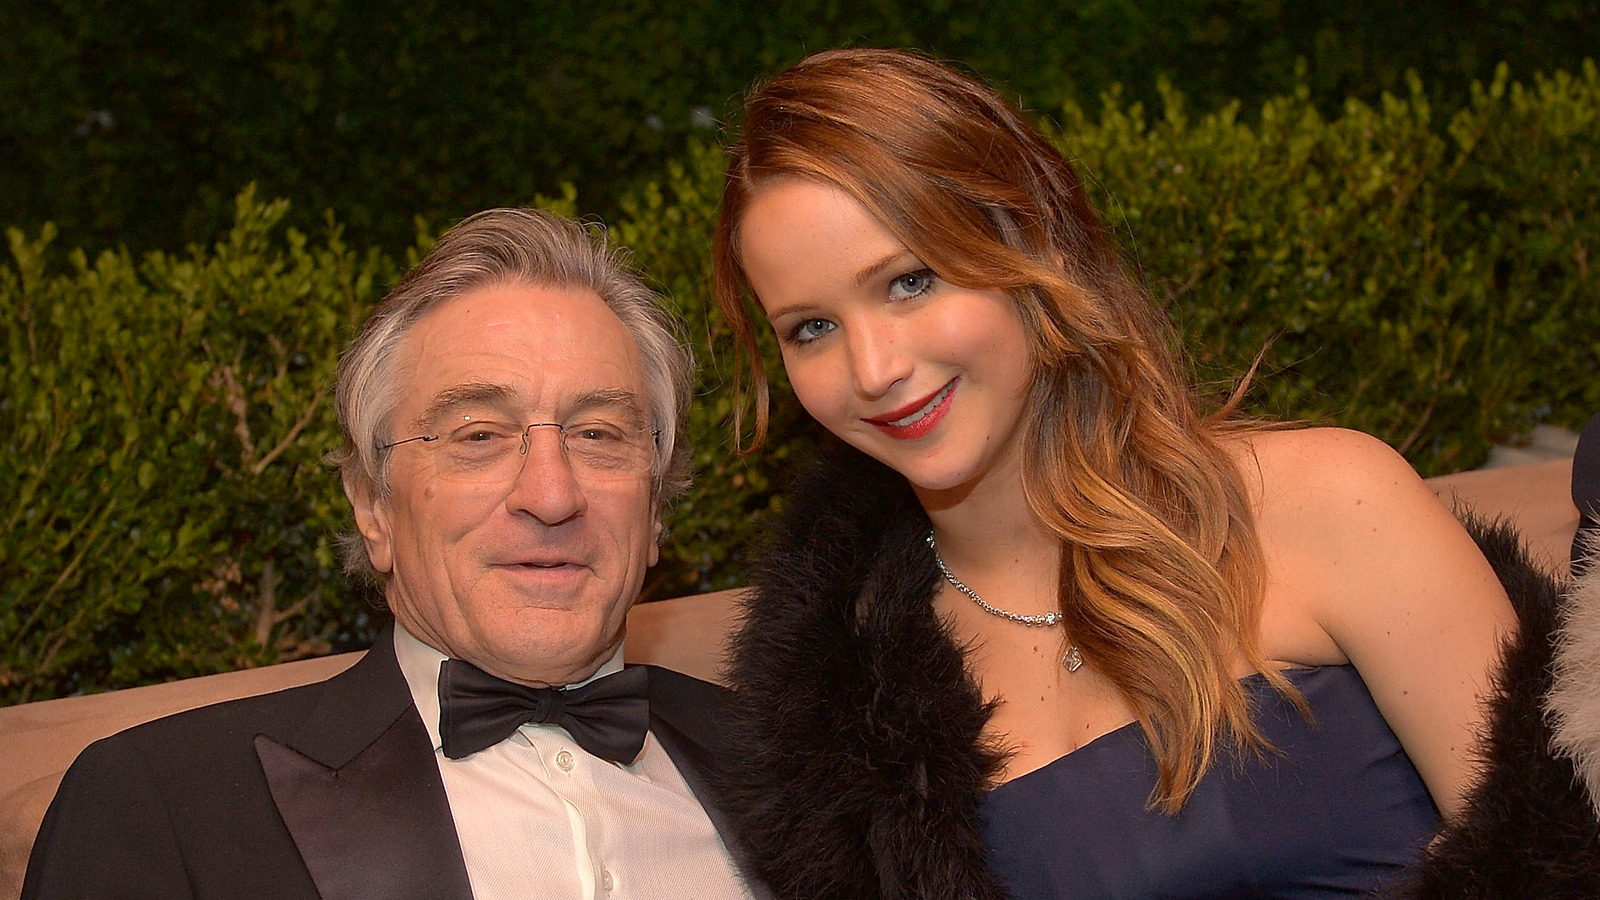 Why Jennifer Lawrence Kicked Robert De Niro Out Of Her Wedding